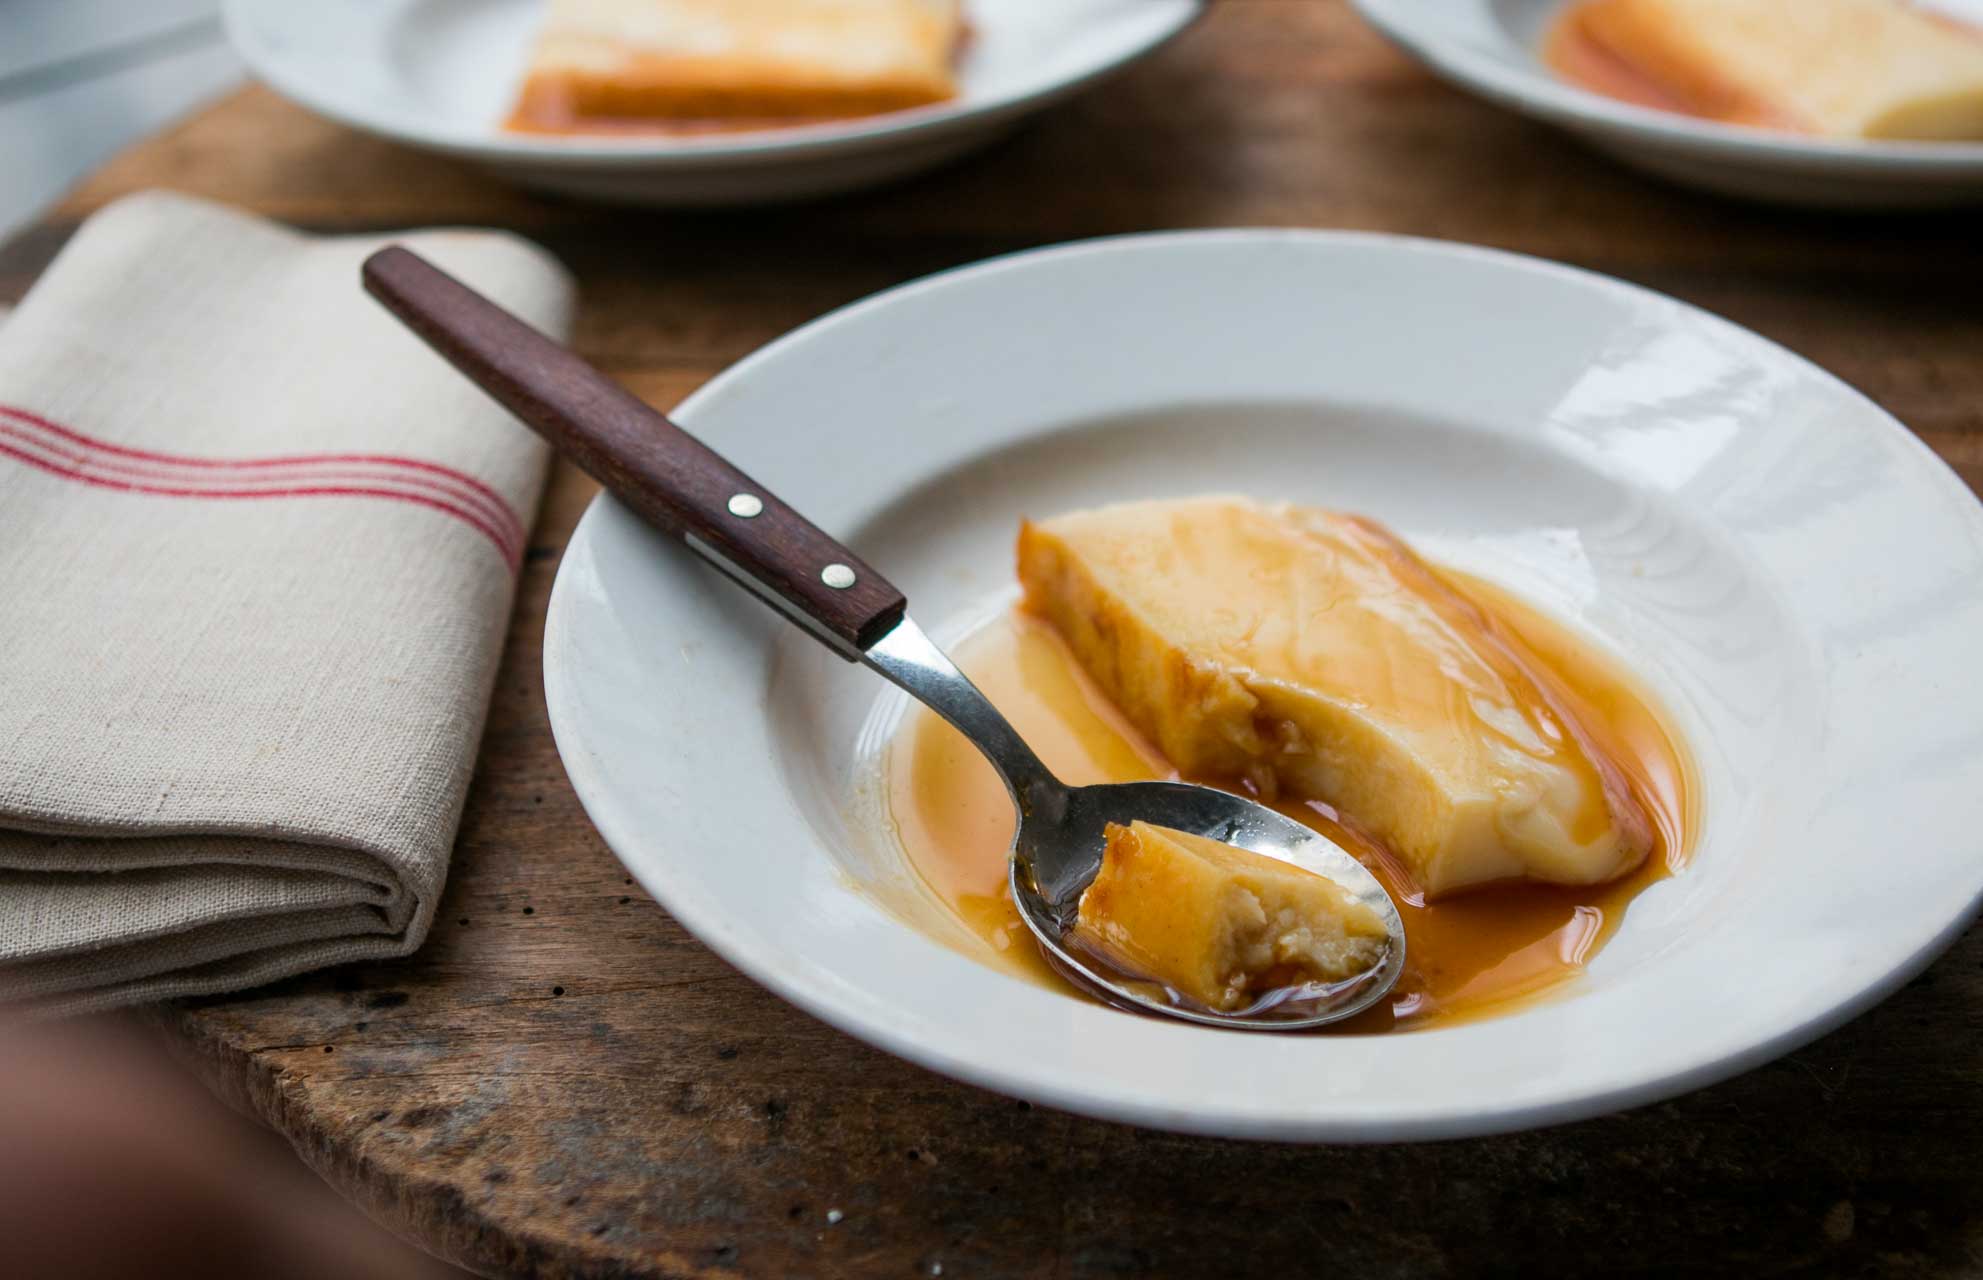 How to make the classic French pastry, Creme Caramel or Flan